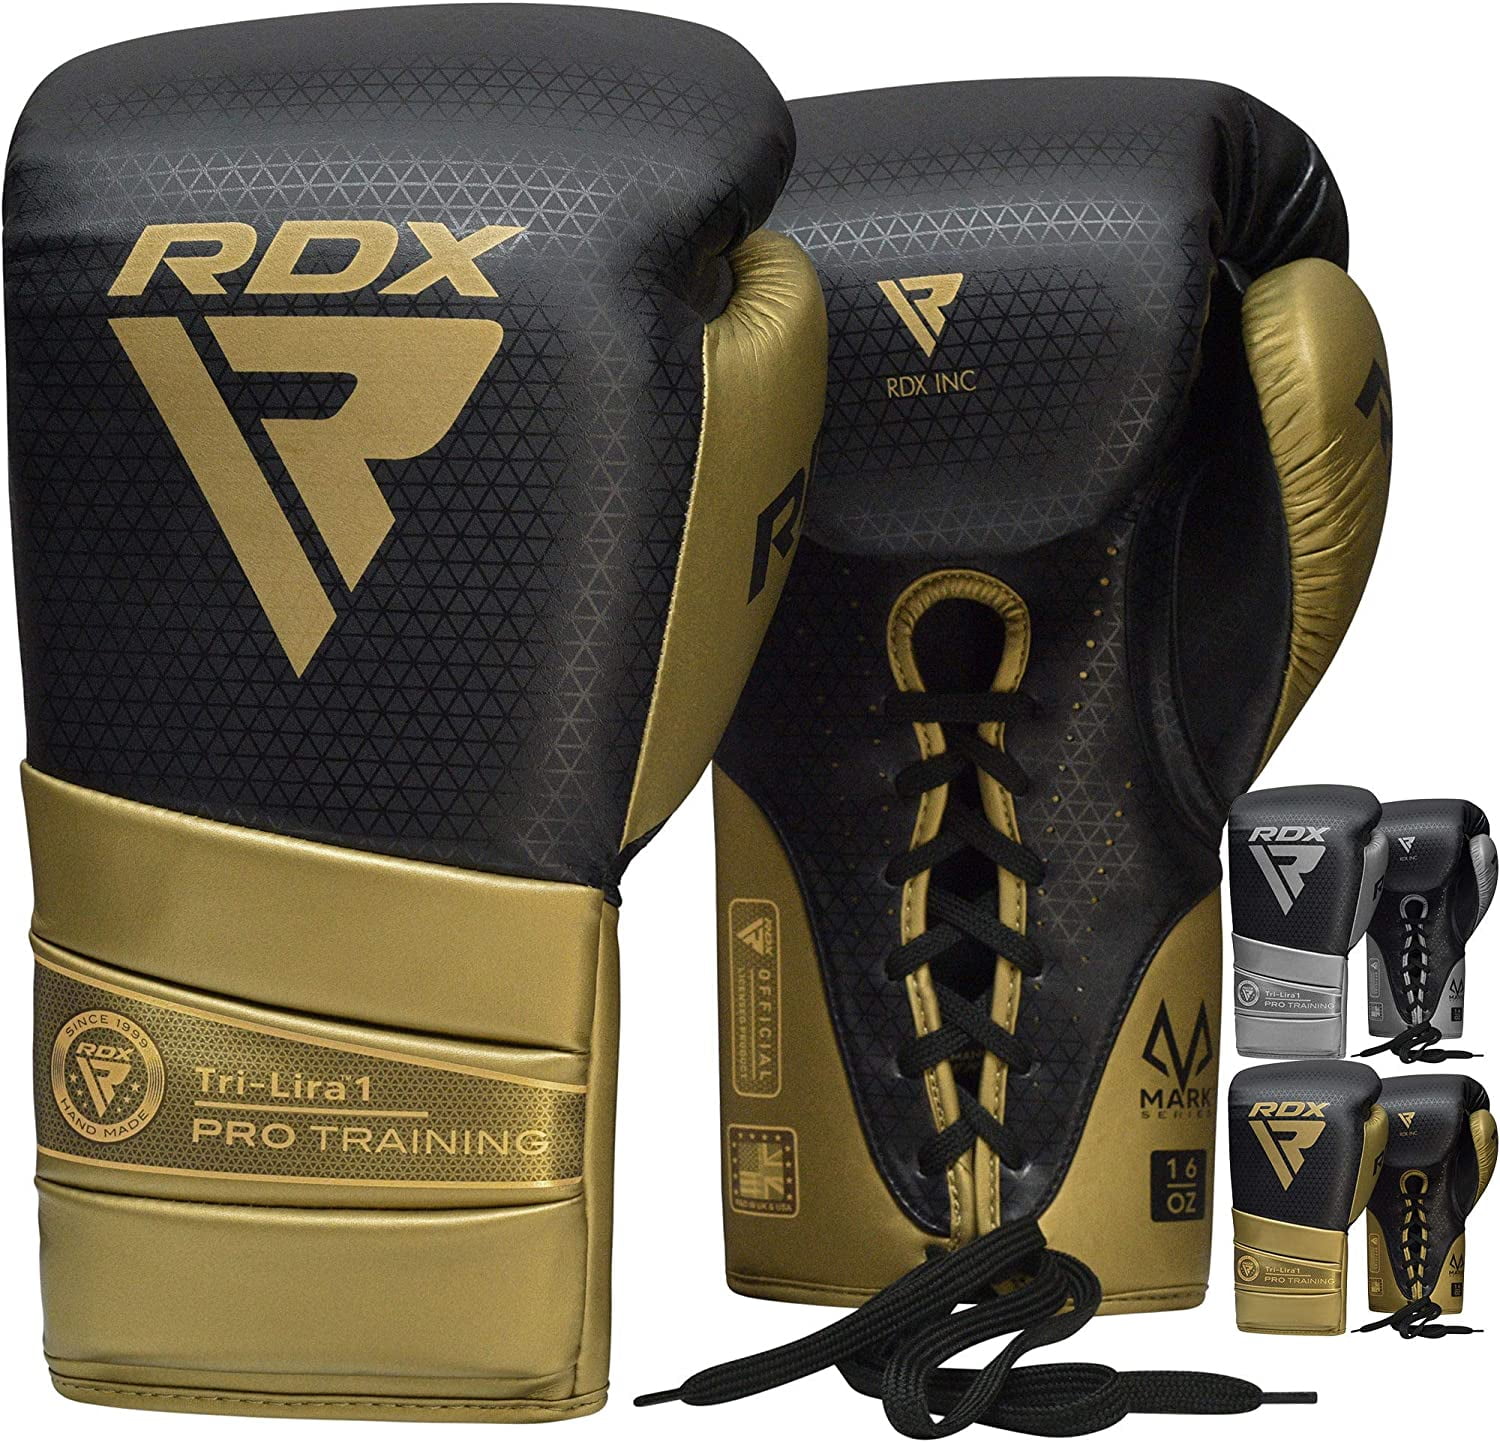 RIX BOXING GLOVES LEATHER Pro MMA Arts Training Sparring Punch Bag kickboxing 